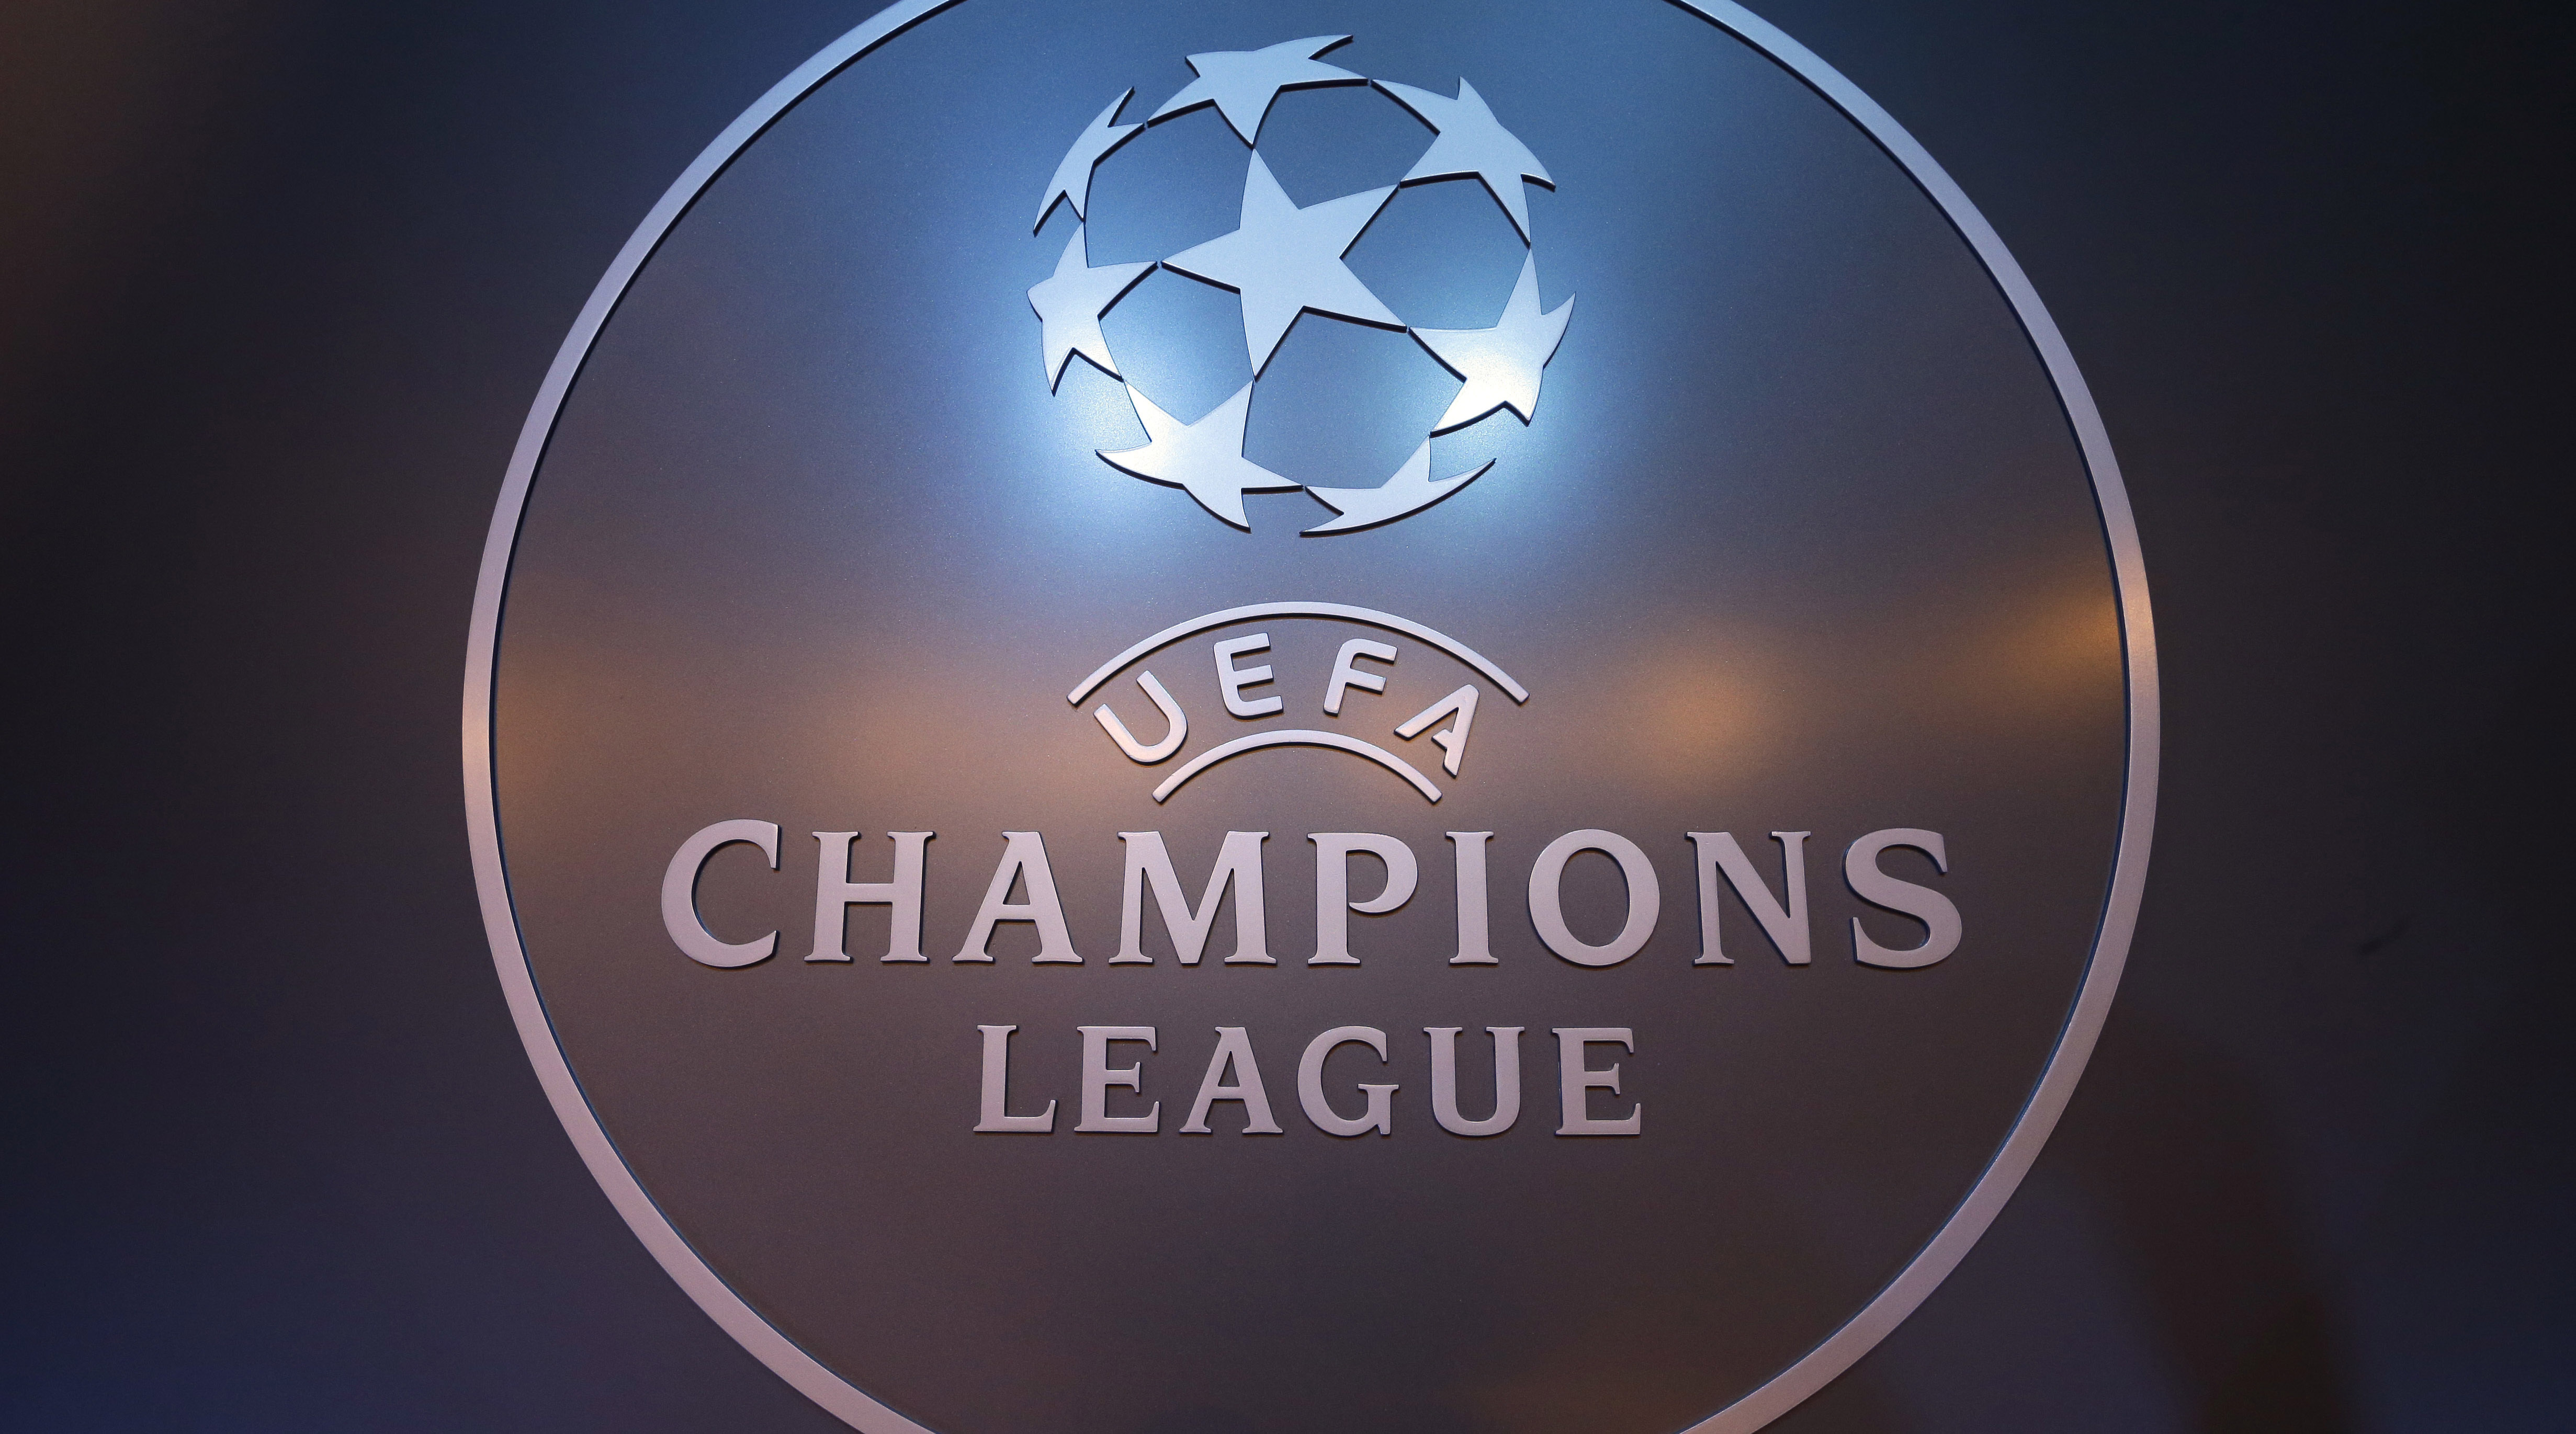 The Champions & European League is back!